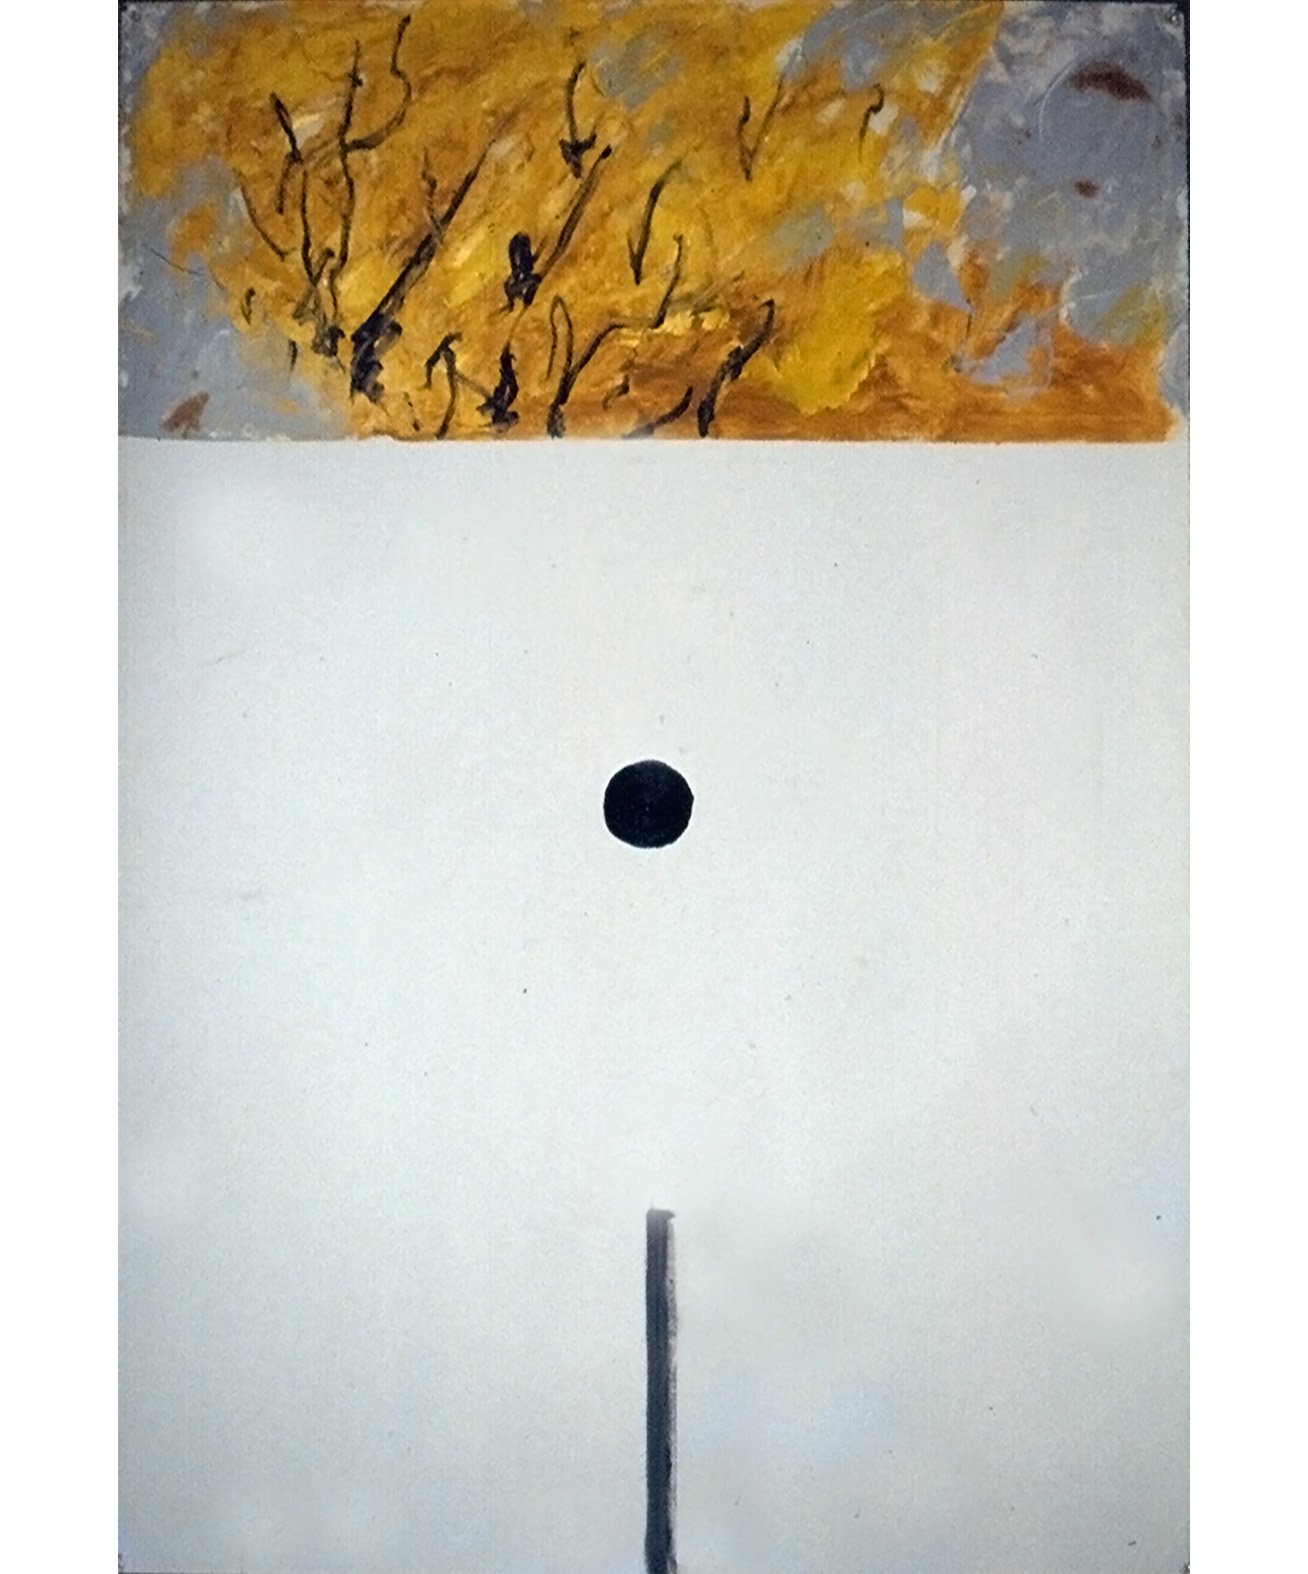 4 Moments, Birdhouse in the snow, oil on paper, 44x30, 1992, PE Pinkman